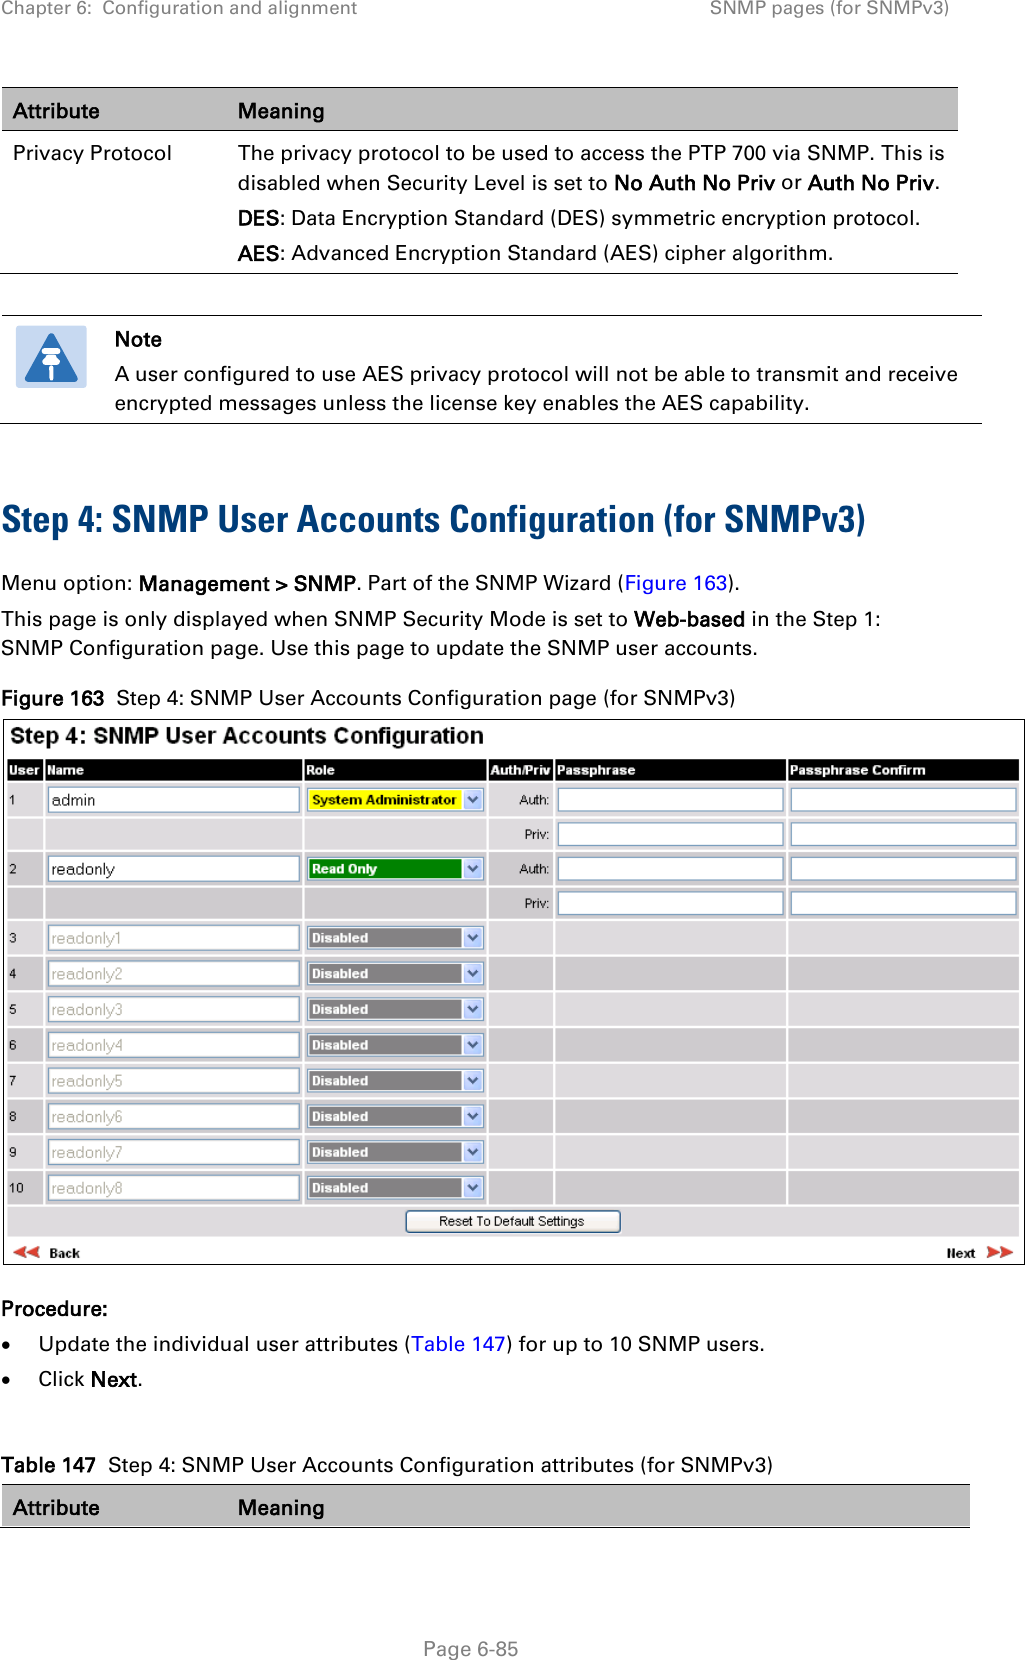 Chapter 6:  Configuration and alignment SNMP pages (for SNMPv3)  Attribute Meaning Privacy Protocol The privacy protocol to be used to access the PTP 700 via SNMP. This is disabled when Security Level is set to No Auth No Priv or Auth No Priv. DES: Data Encryption Standard (DES) symmetric encryption protocol. AES: Advanced Encryption Standard (AES) cipher algorithm.    Note A user configured to use AES privacy protocol will not be able to transmit and receive encrypted messages unless the license key enables the AES capability.  Step 4: SNMP User Accounts Configuration (for SNMPv3) Menu option: Management &gt; SNMP. Part of the SNMP Wizard (Figure 163). This page is only displayed when SNMP Security Mode is set to Web-based in the Step 1: SNMP Configuration page. Use this page to update the SNMP user accounts. Figure 163  Step 4: SNMP User Accounts Configuration page (for SNMPv3)  Procedure: • Update the individual user attributes (Table 147) for up to 10 SNMP users. • Click Next.  Table 147  Step 4: SNMP User Accounts Configuration attributes (for SNMPv3) Attribute Meaning  Page 6-85 